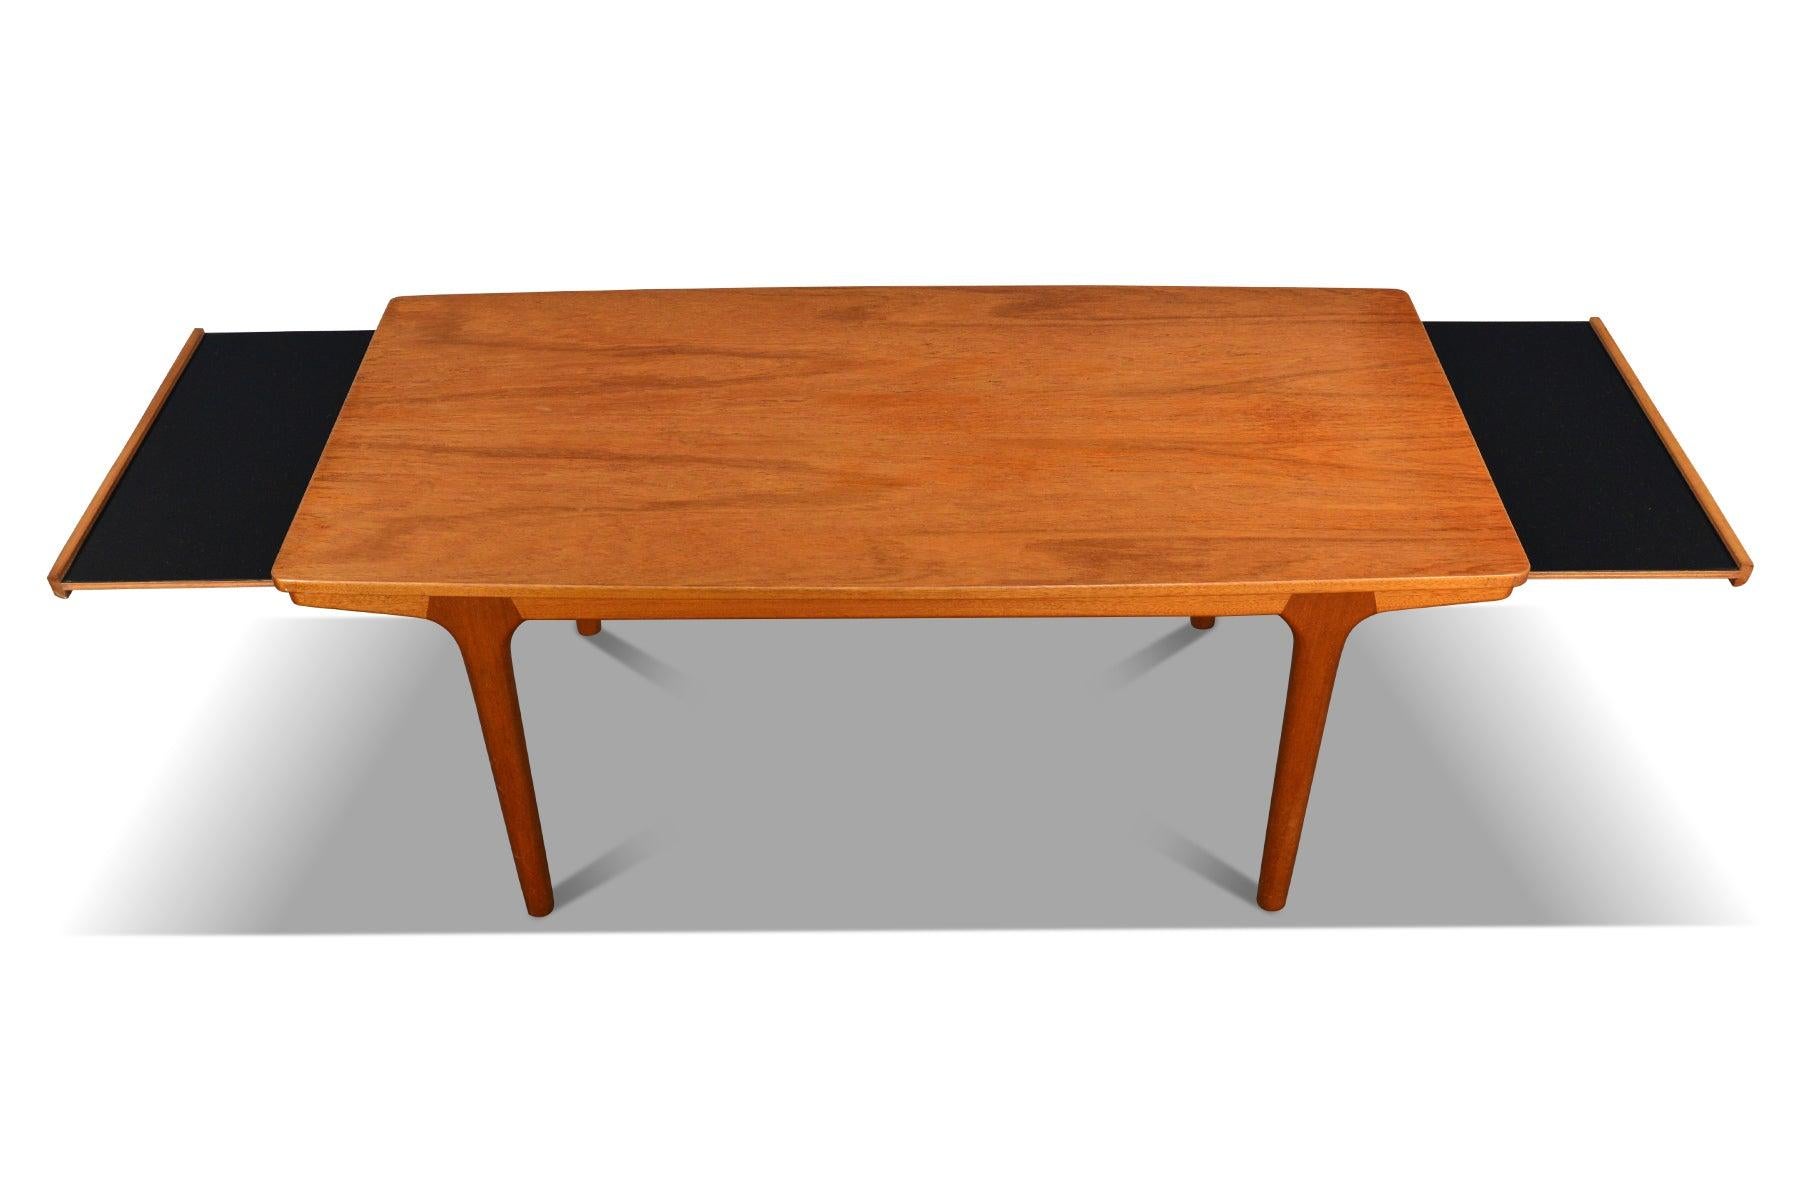 A.H. Mcintosh Teak Surfboard Coffee Table with Pullout Drink Trays #1 1